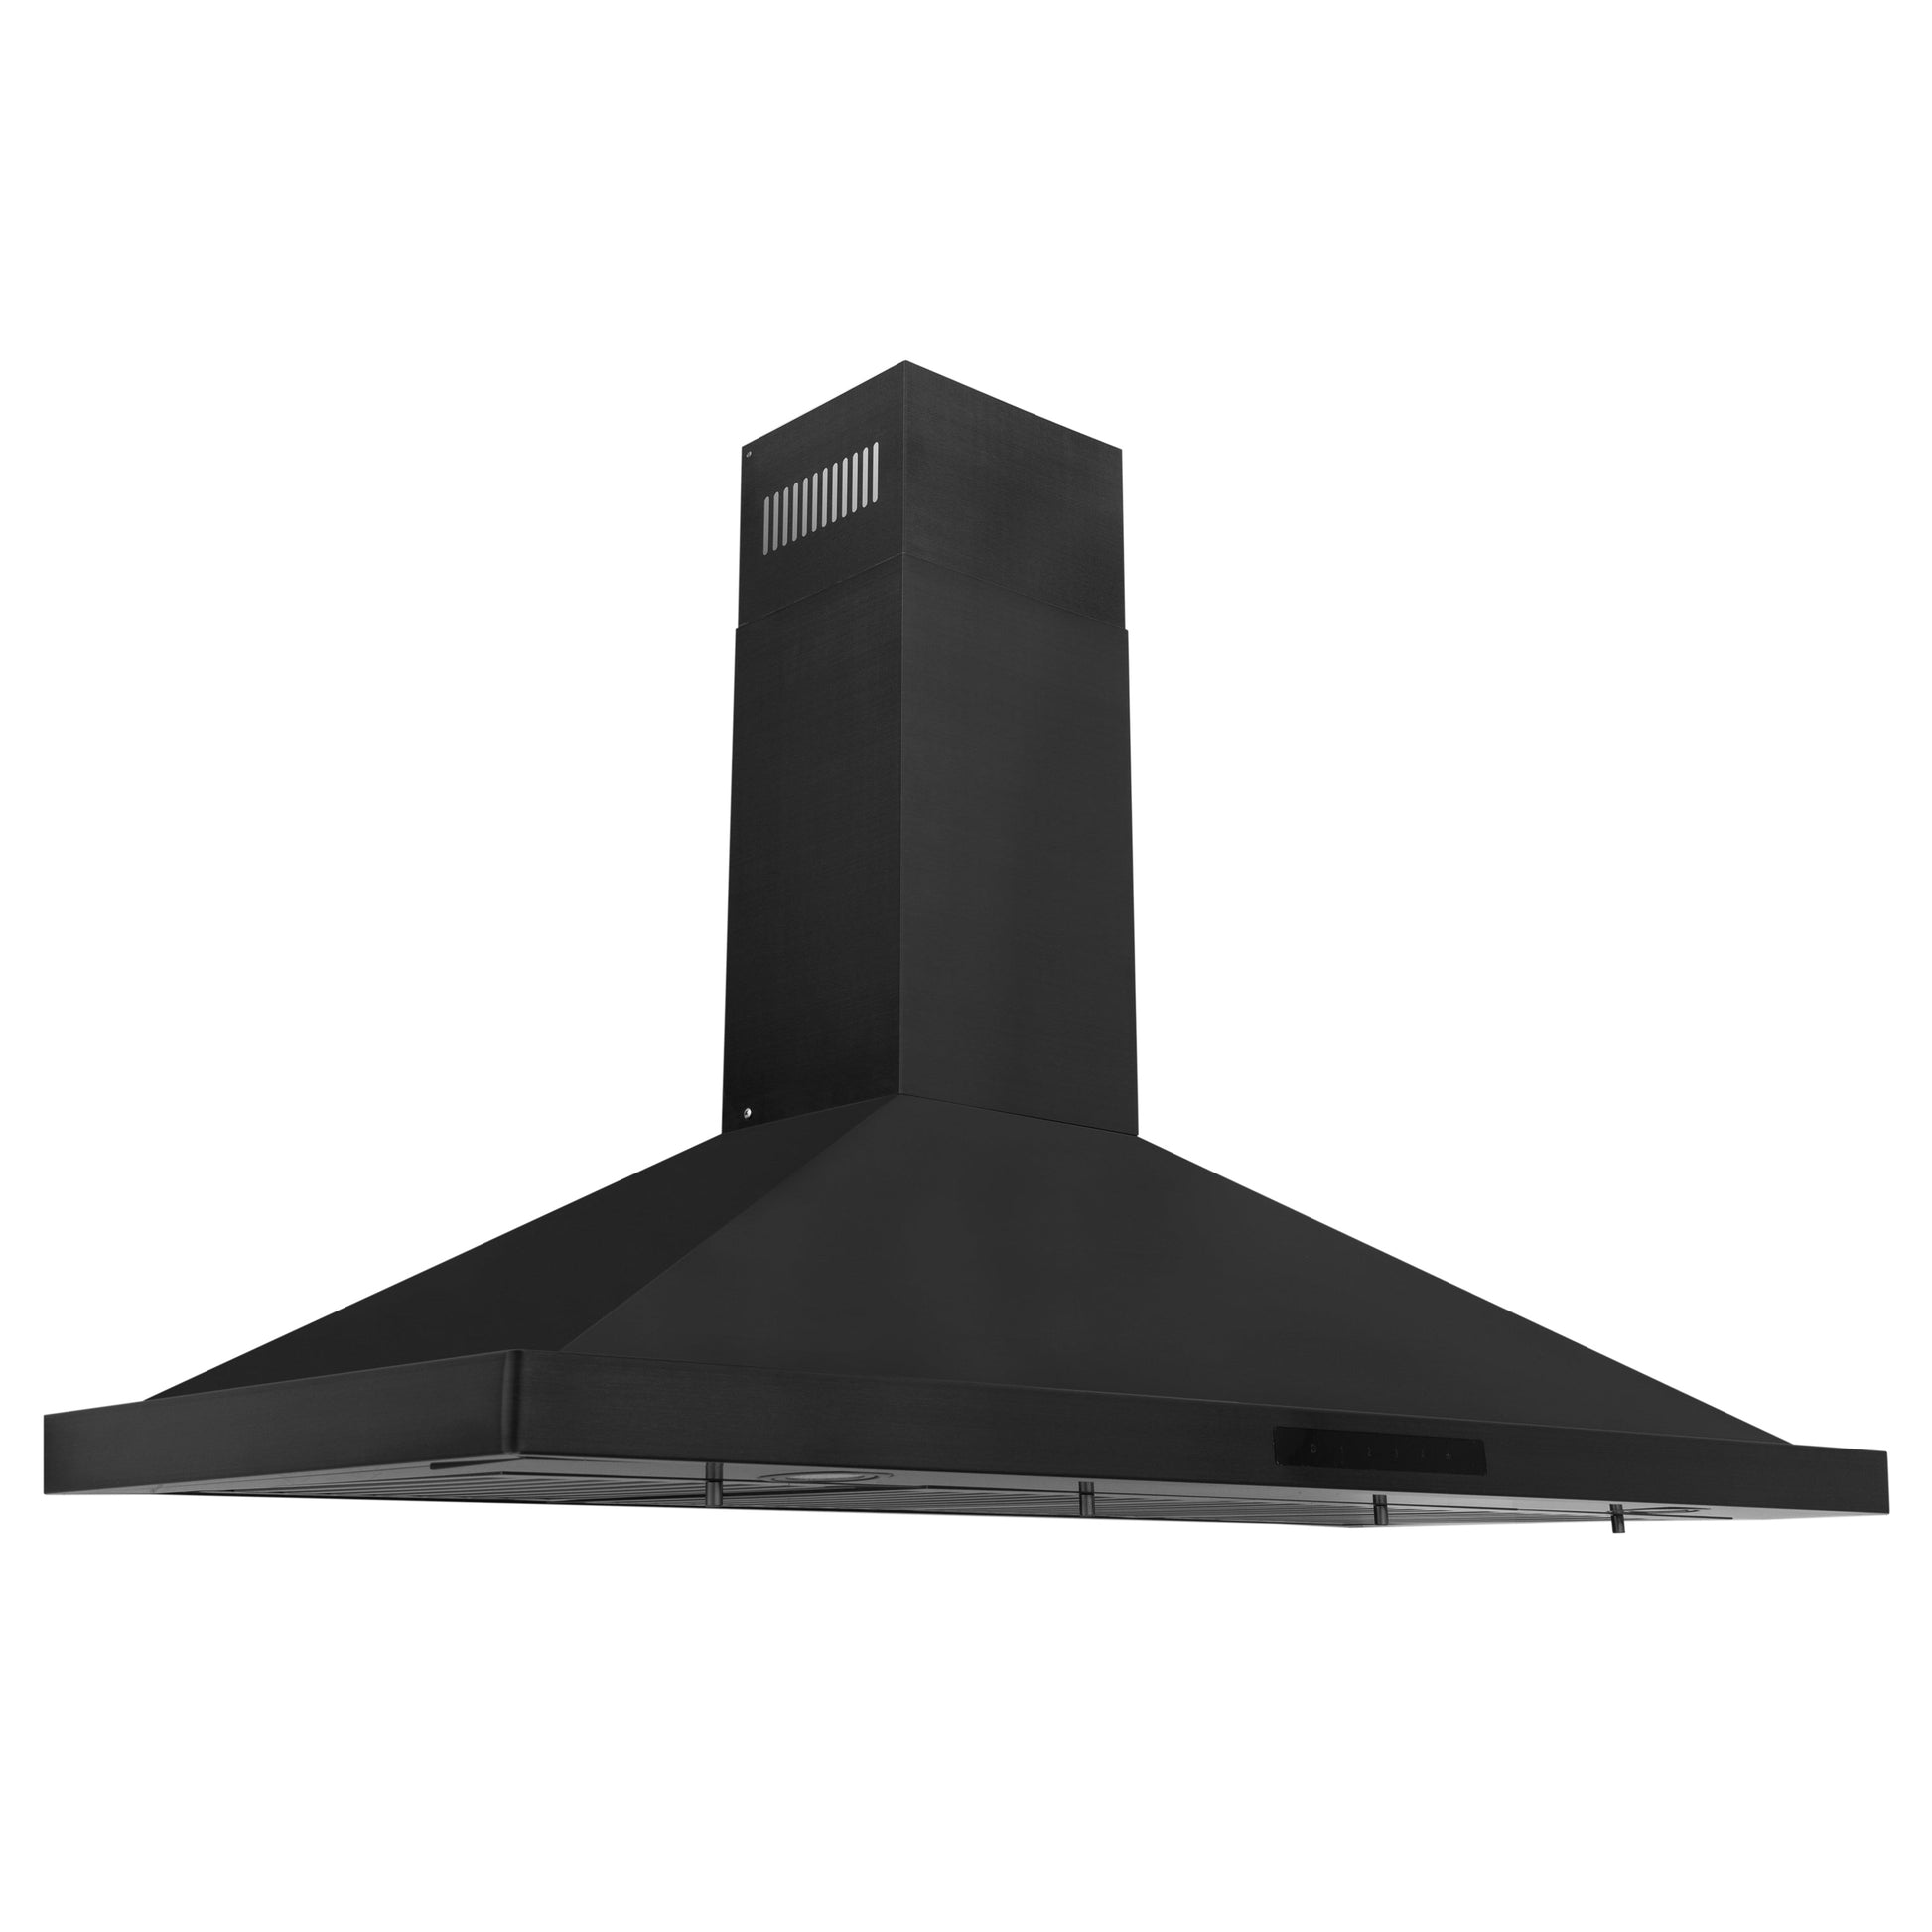 ZLINE 2-Appliance 48" Kitchen Package with Black Stainless Steel Dual Fuel Range and Convertible Vent Range Hood